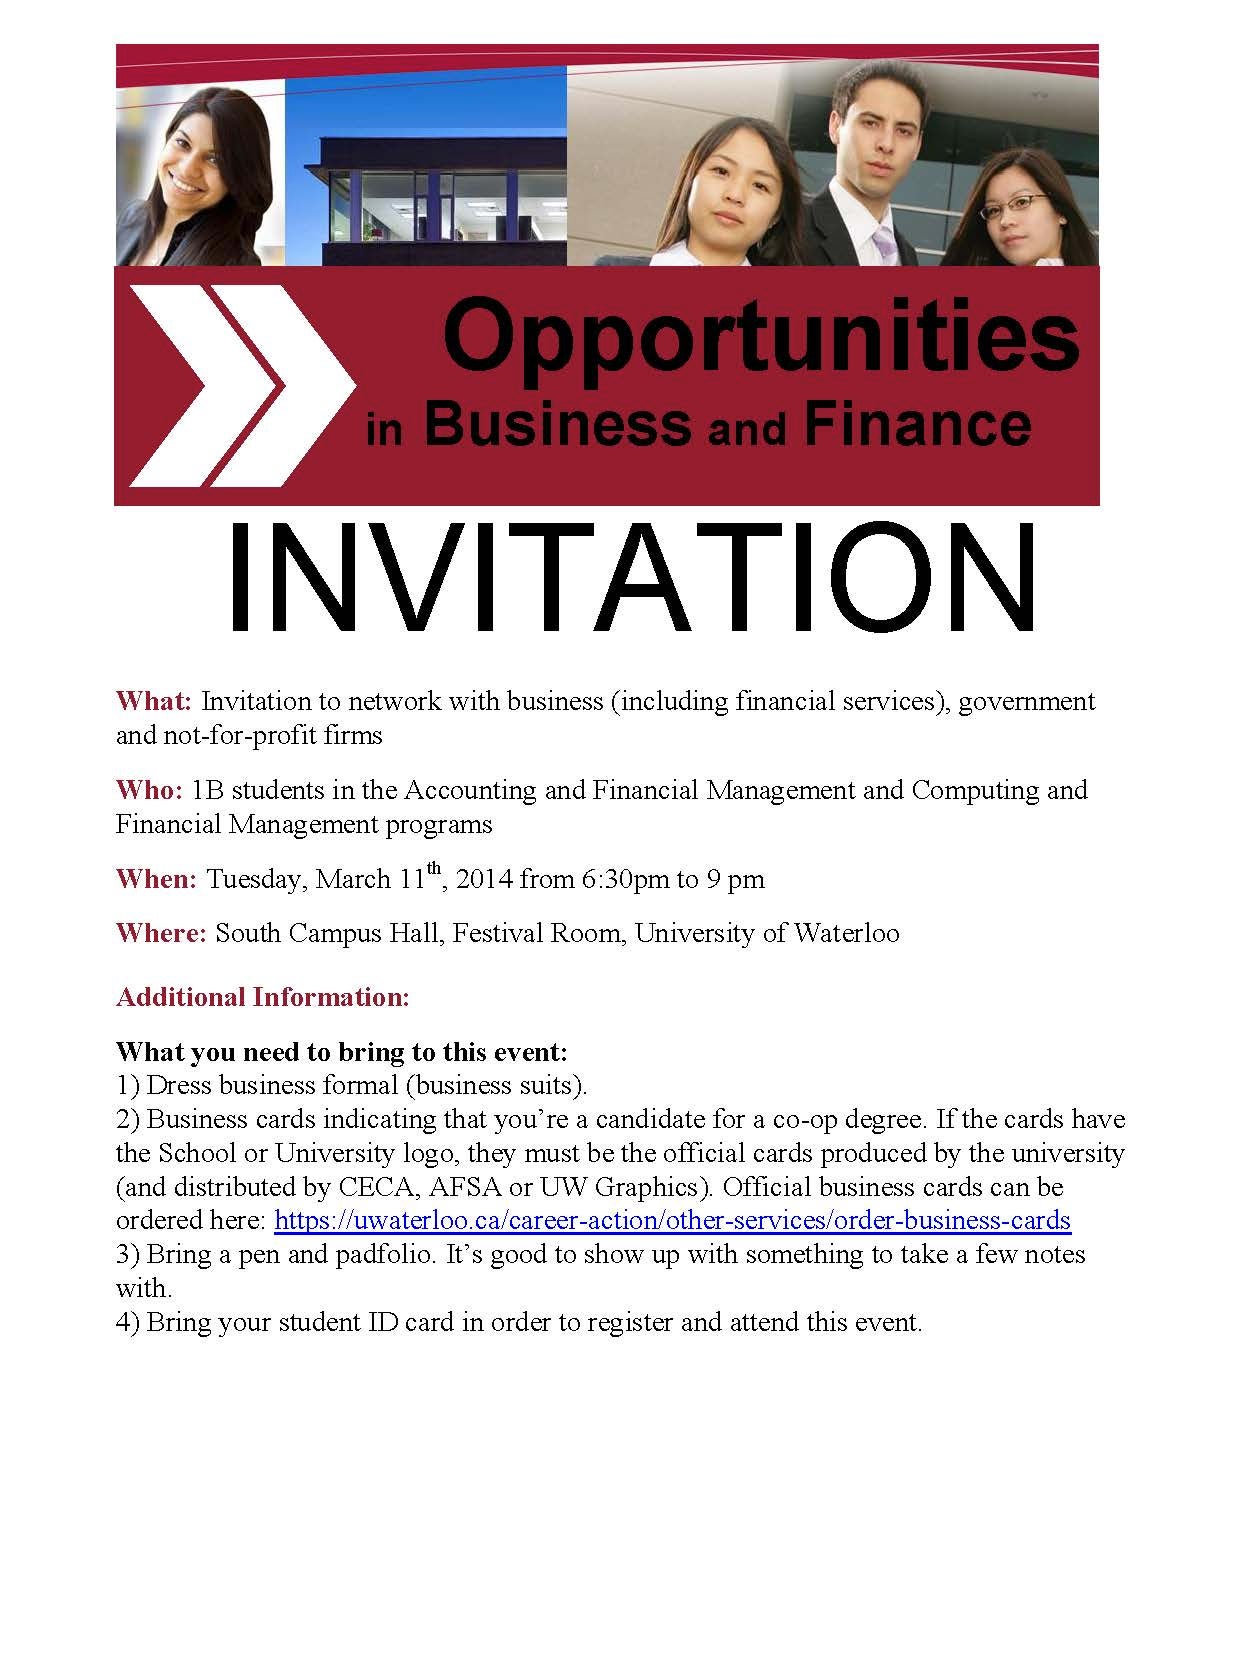 Opportunities in Business and Finance 2014 - Invitation